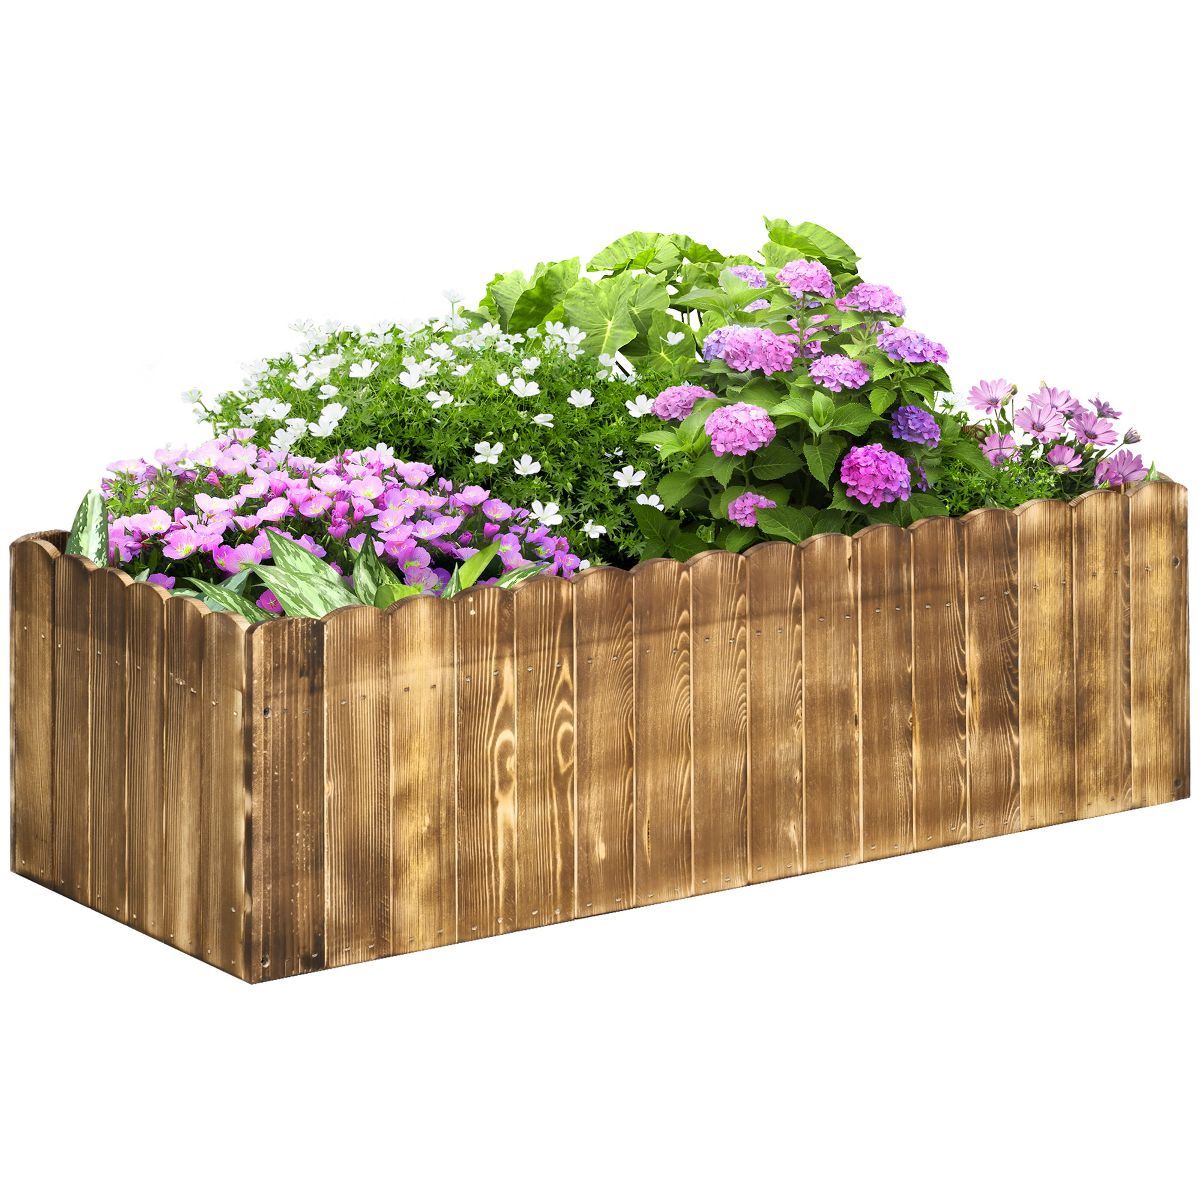 Outsunny 40" x 16" x 12" Raised Garden Bed, Raised Planter Box, Wooden Planter Raised Bed with Dr... | Target